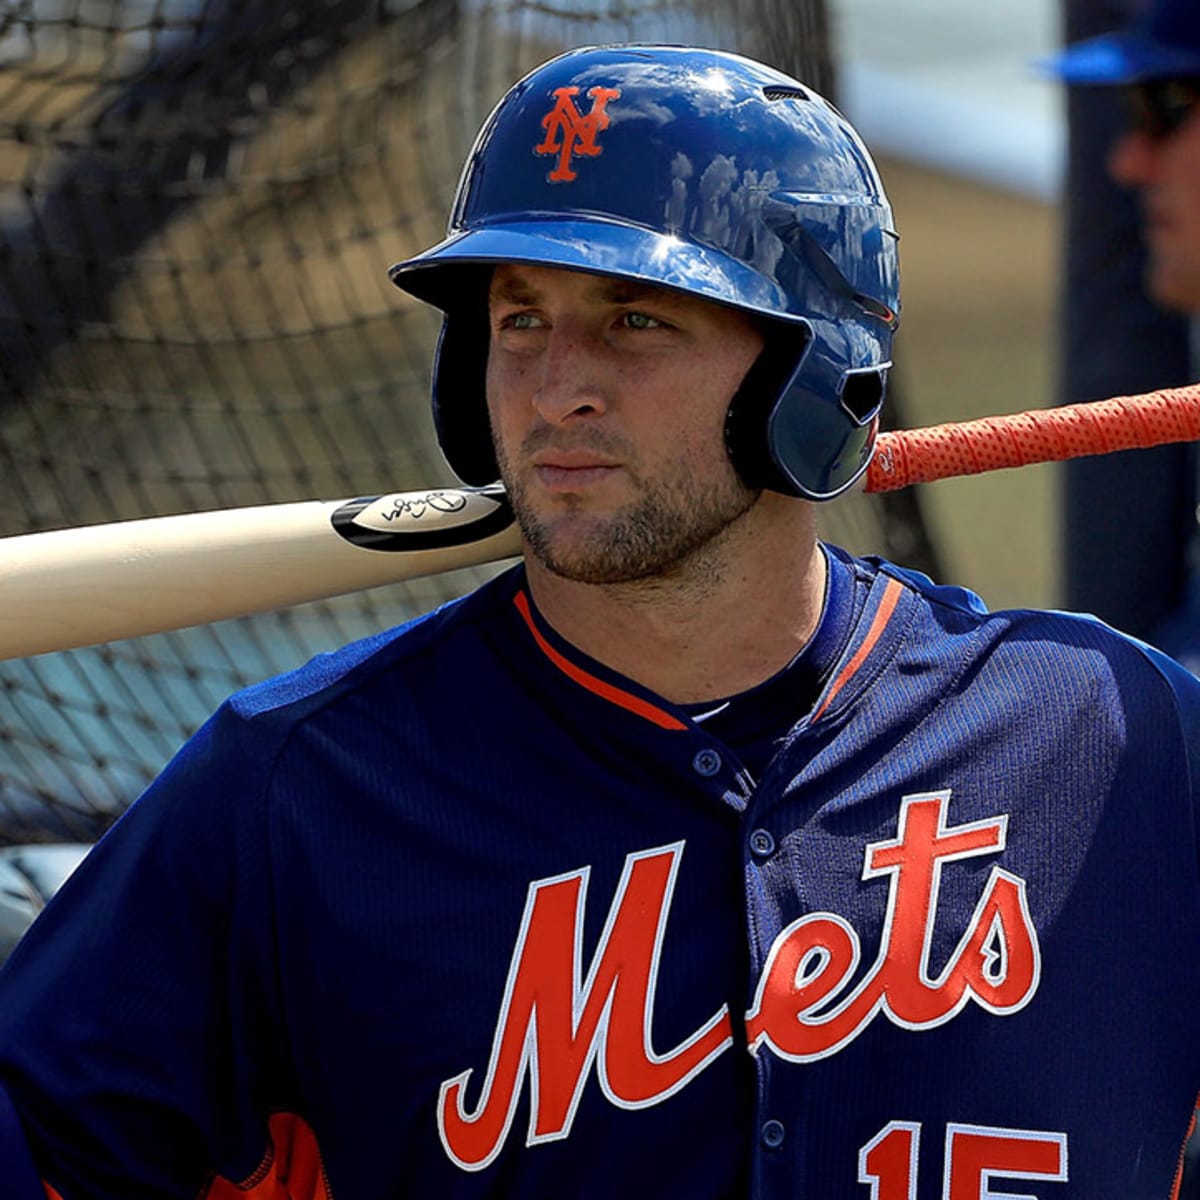 Tim Tebow blasts homer in first day with St. Lucie Mets